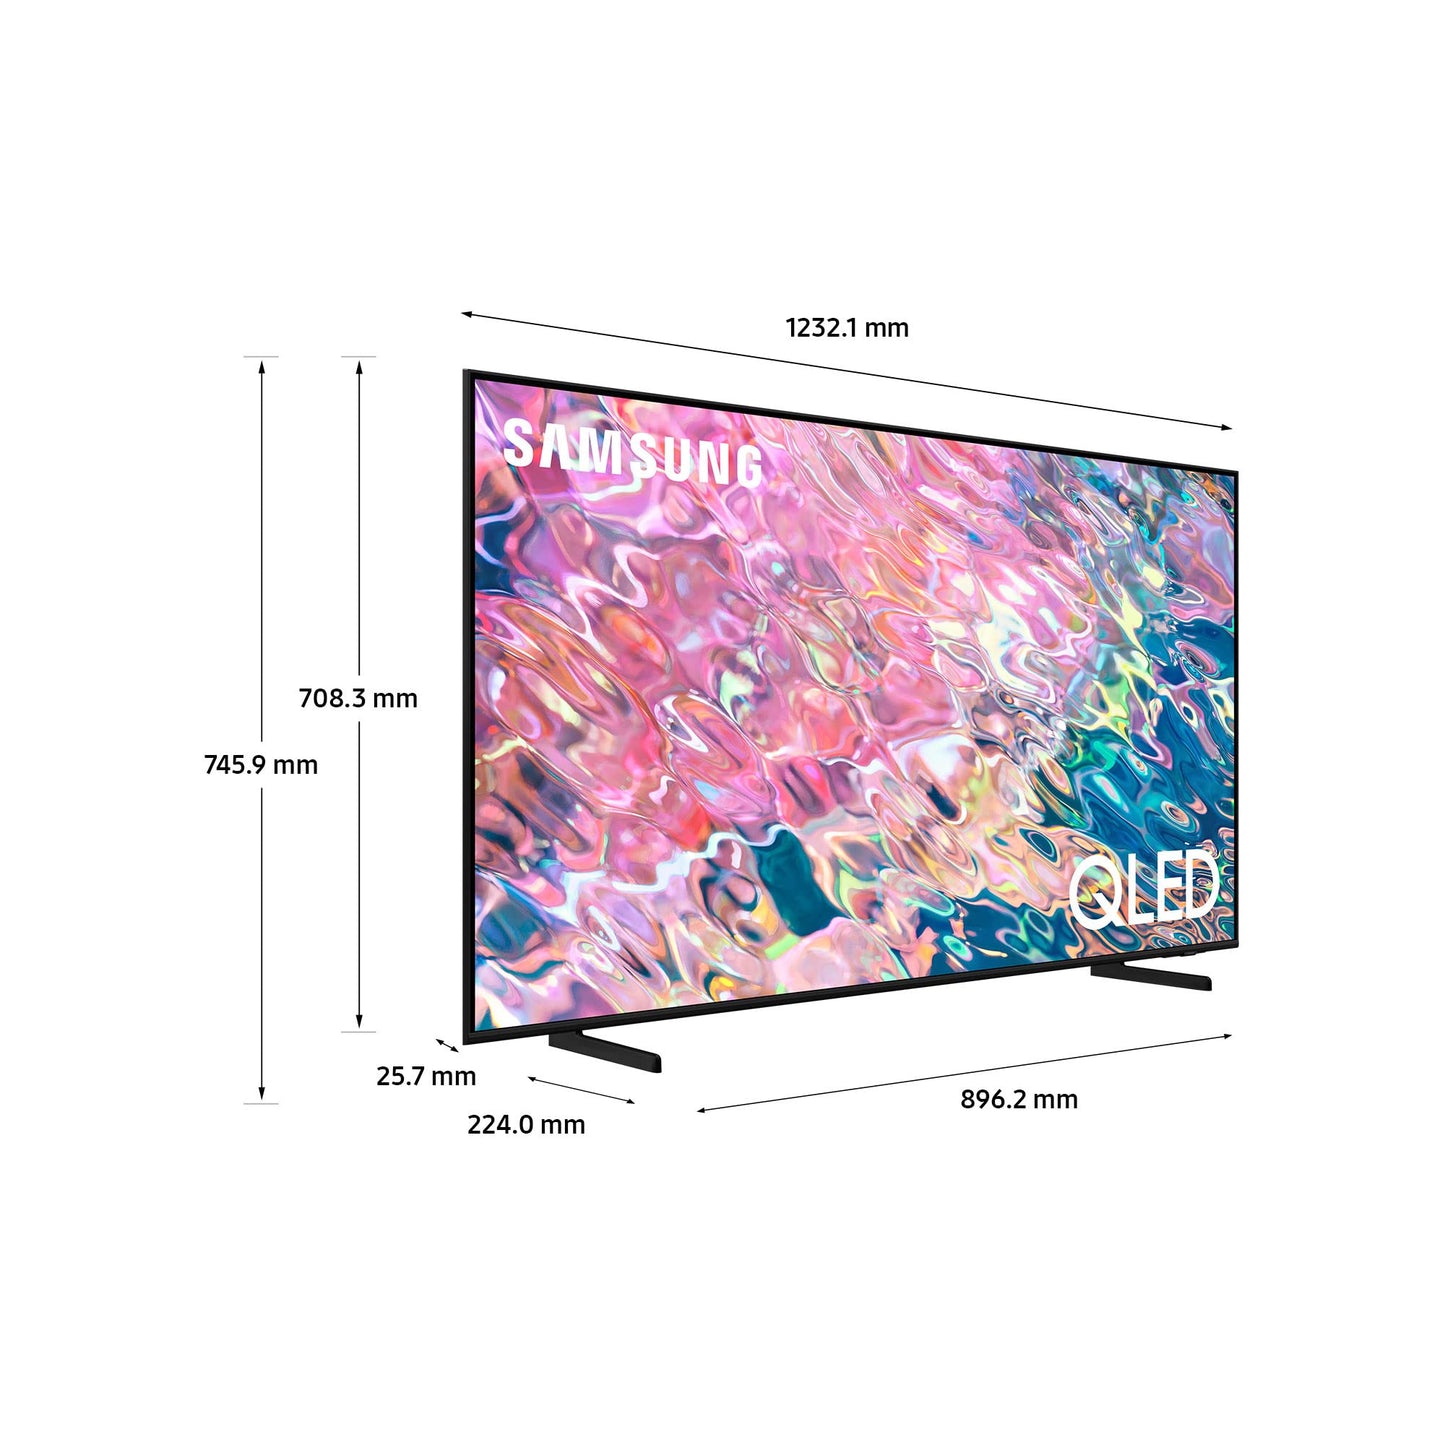 SAMSUNG 55 Inch Q60B QLED 4K Smart TV (2022) - 4K Processor With Alexa Built In & Dual LED Screen With 100% Colour Volume Display, Airslim Design, Object Tracking Sound, Super Ultrawide Gameview